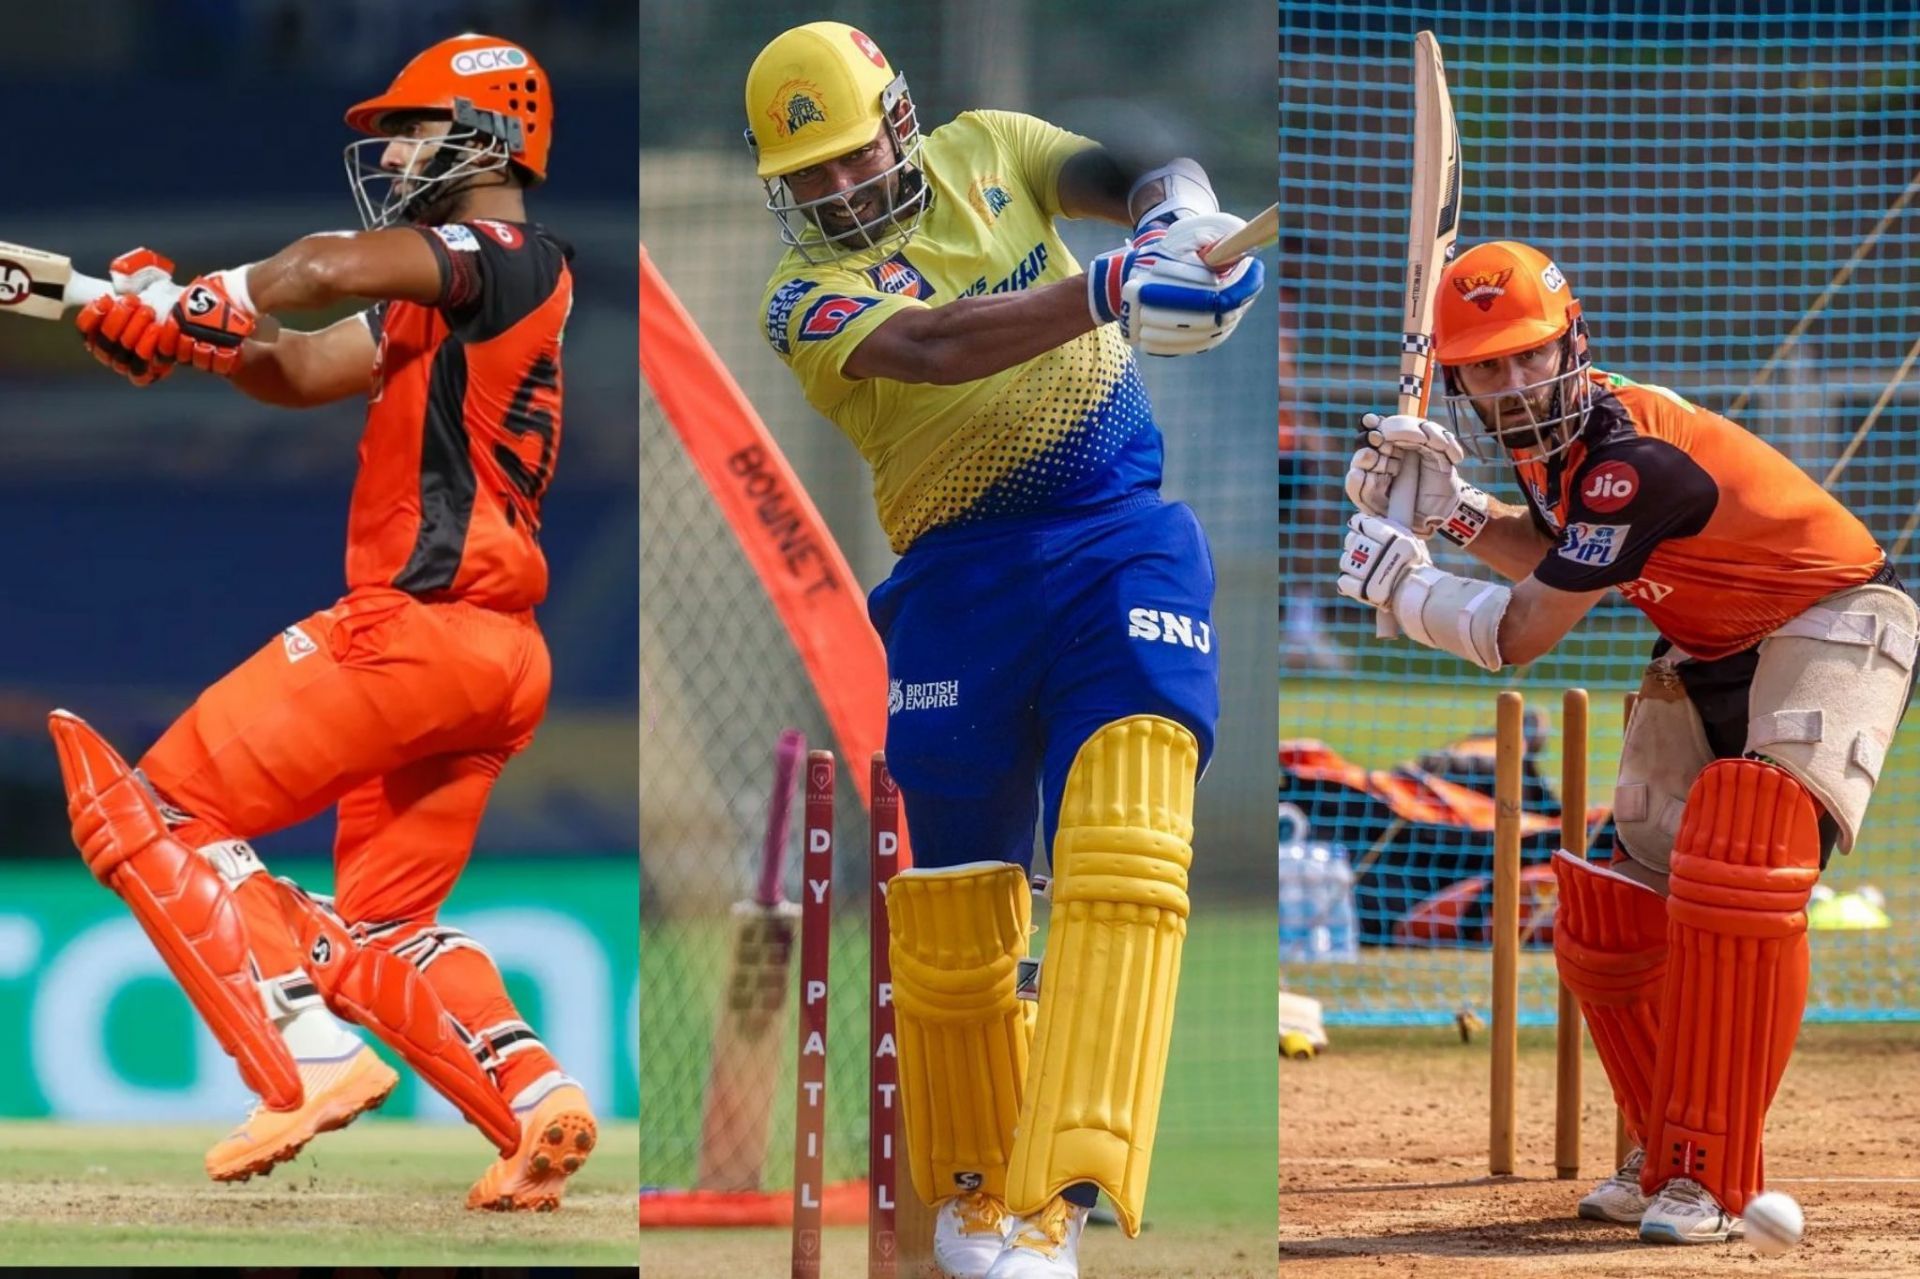 Match 17 of the IPL 2022 will be played between Chennai Super Kings and Sunrisers Hyderabad